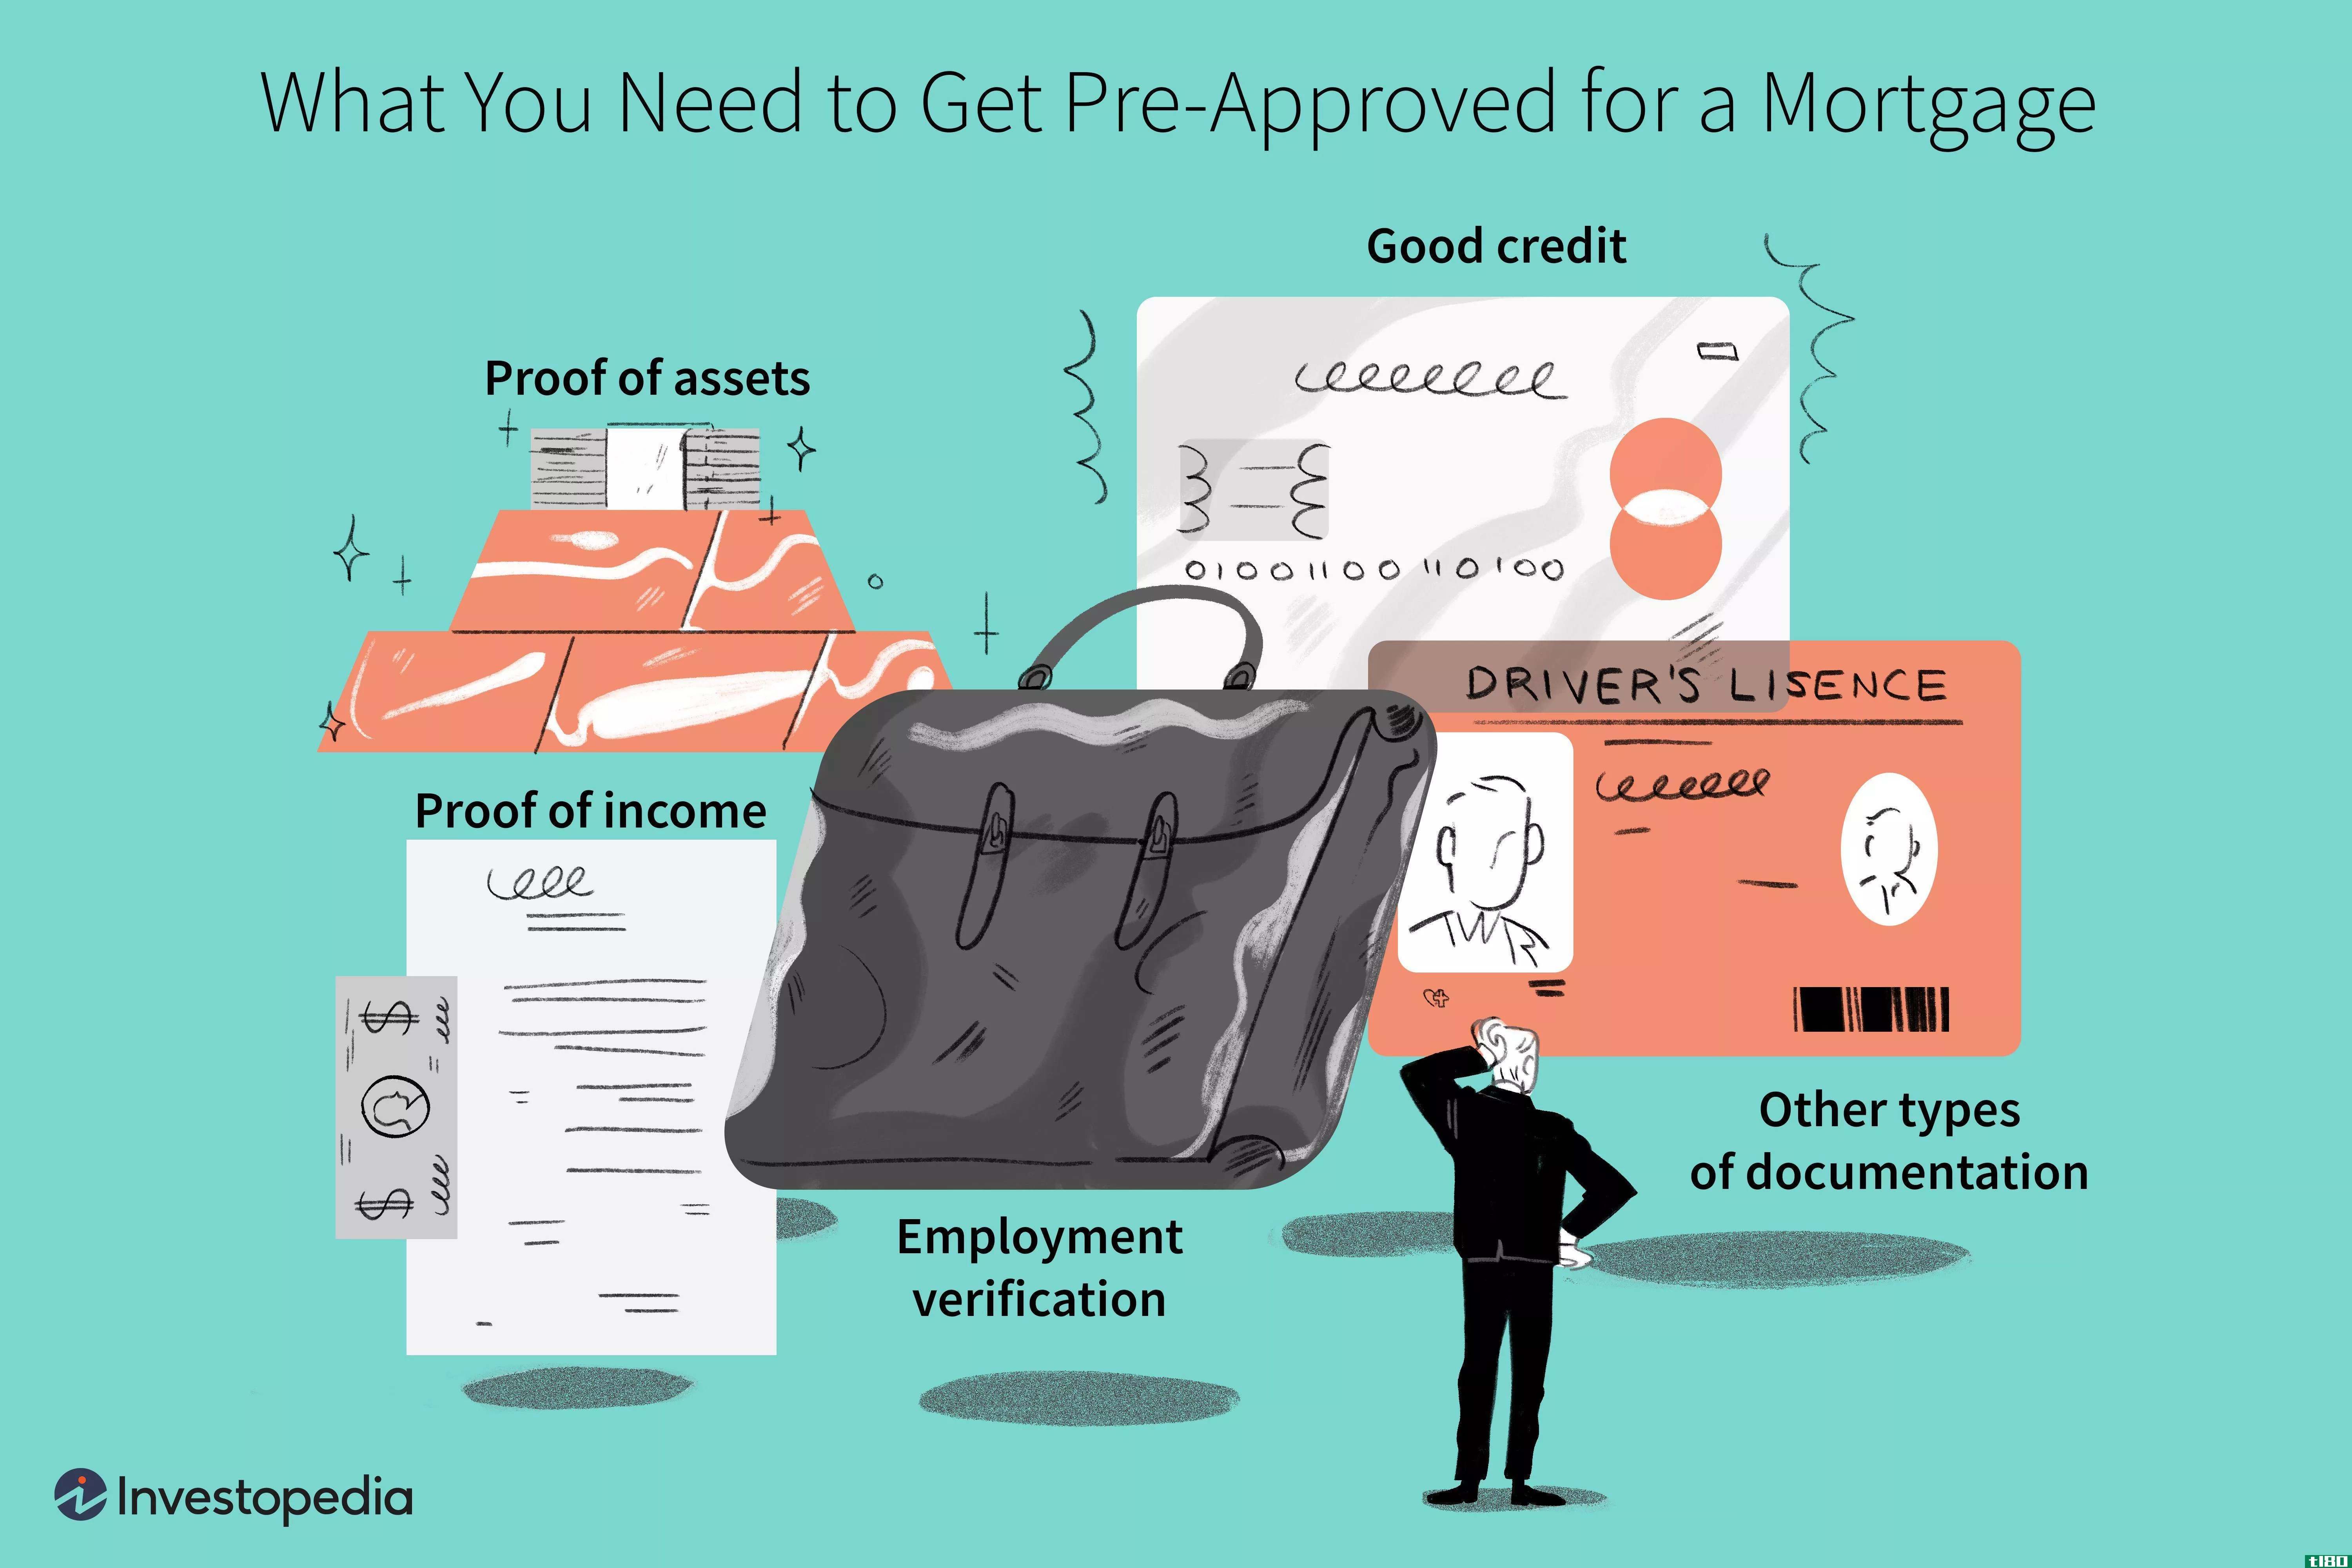 What You Need to Get Pre-Approved for a Mortgage